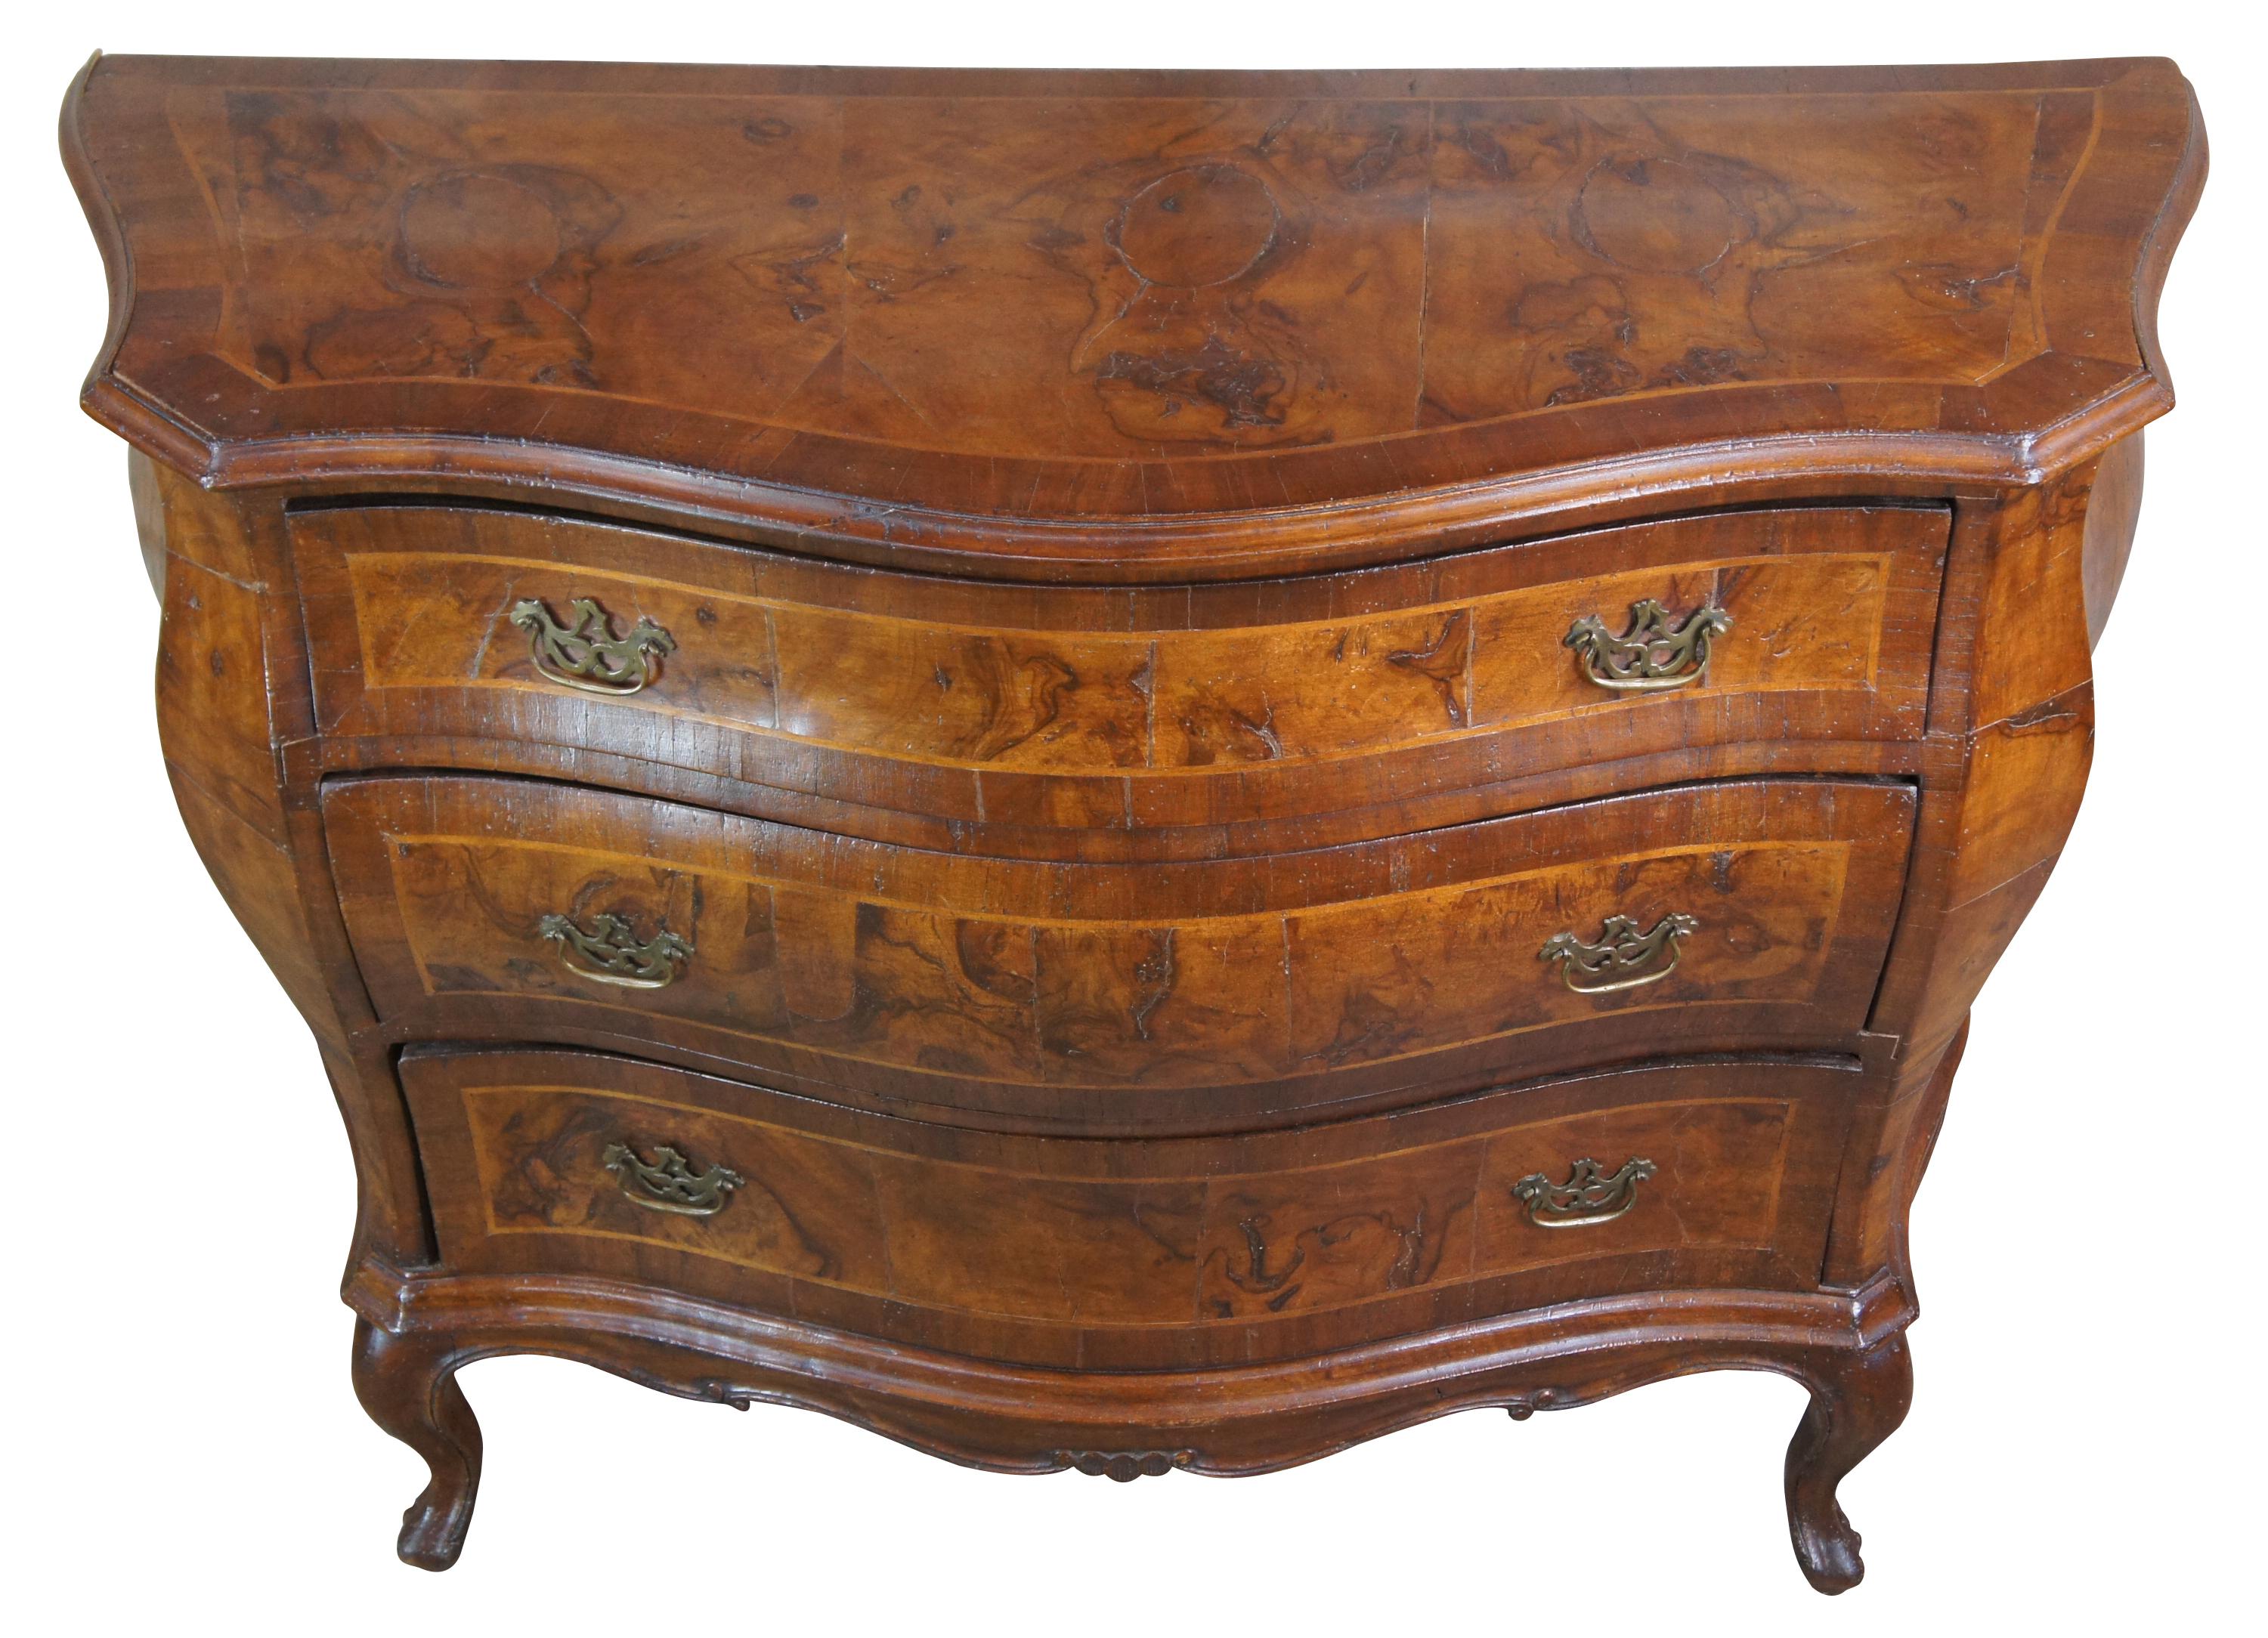 Antique Italian bombe, commode or chest, circa first half 19th century. Made of walnut and olive wood with naturaal distressing. Features serpentine demilune form with inlaid accents, brass hardware and hand cut nails. Measure: 47